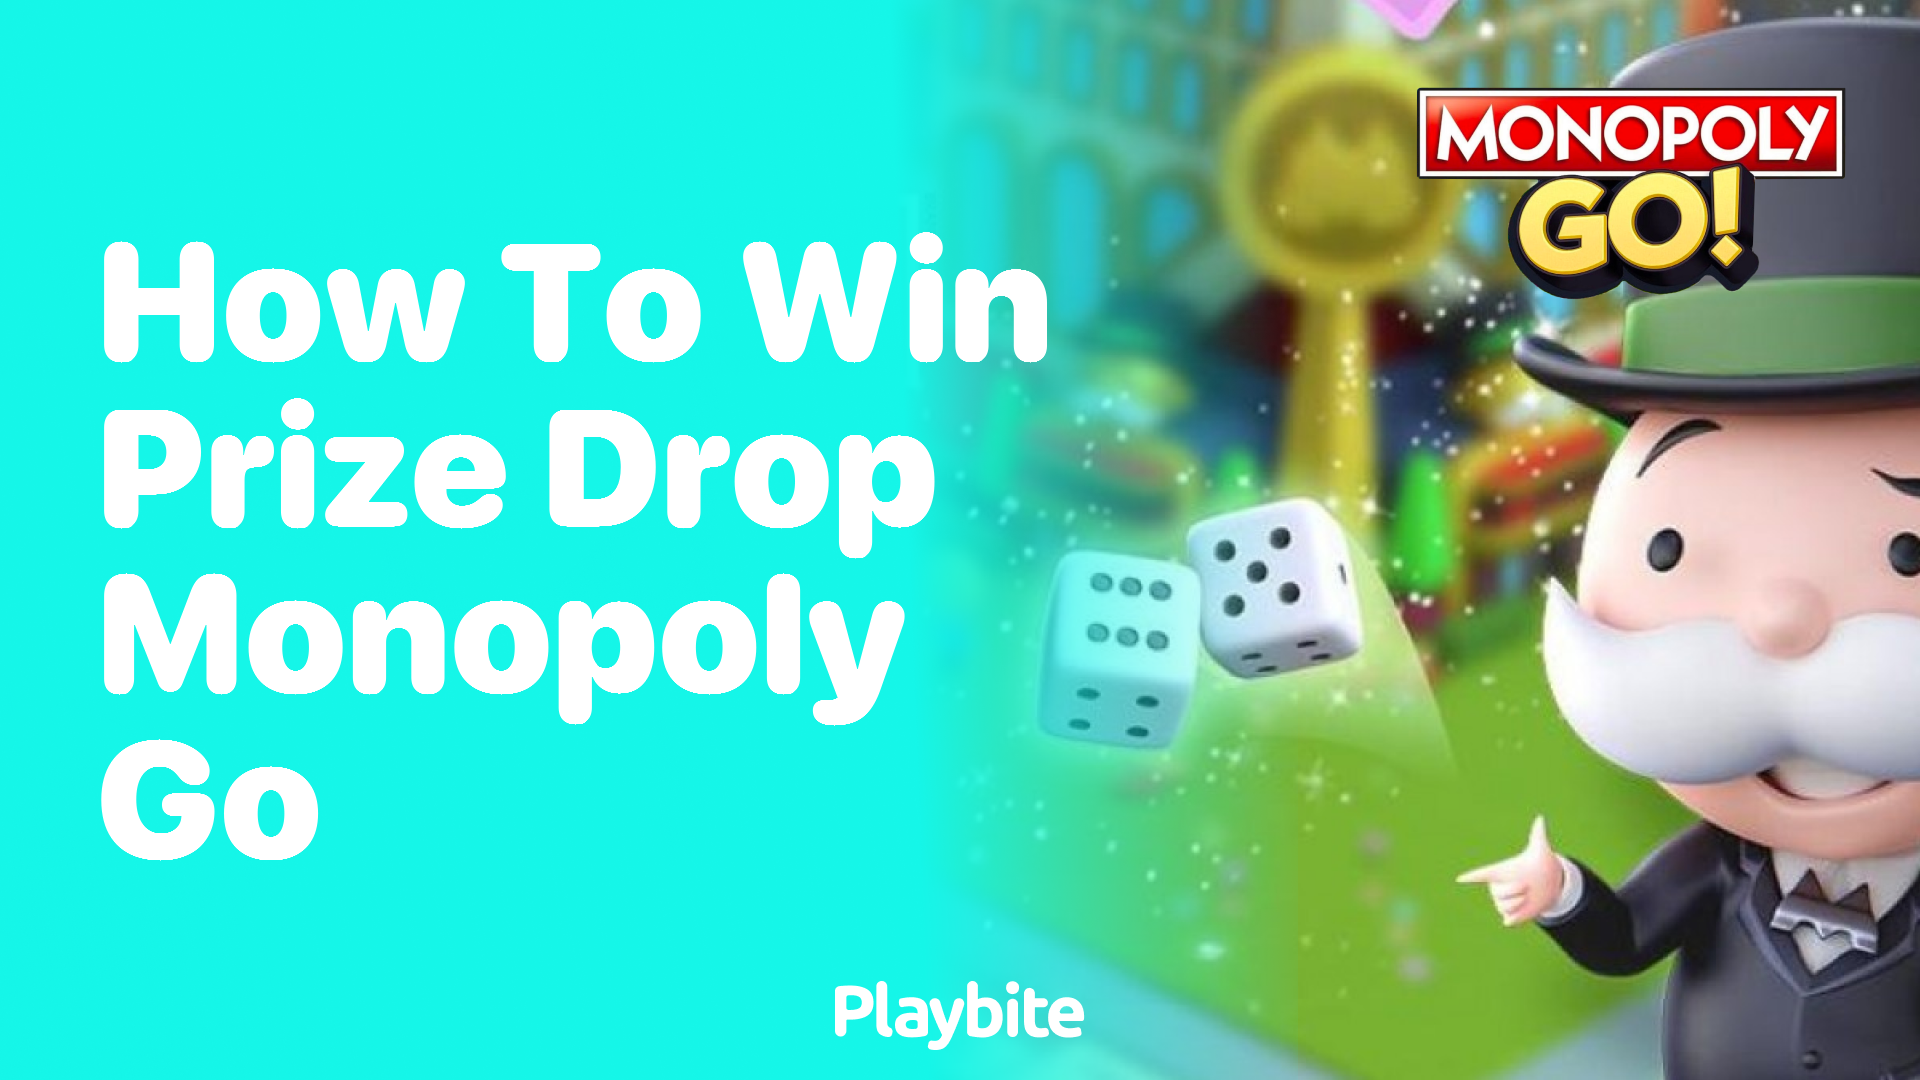 How to Win Prize Drop in Monopoly Go: A Handy Guide